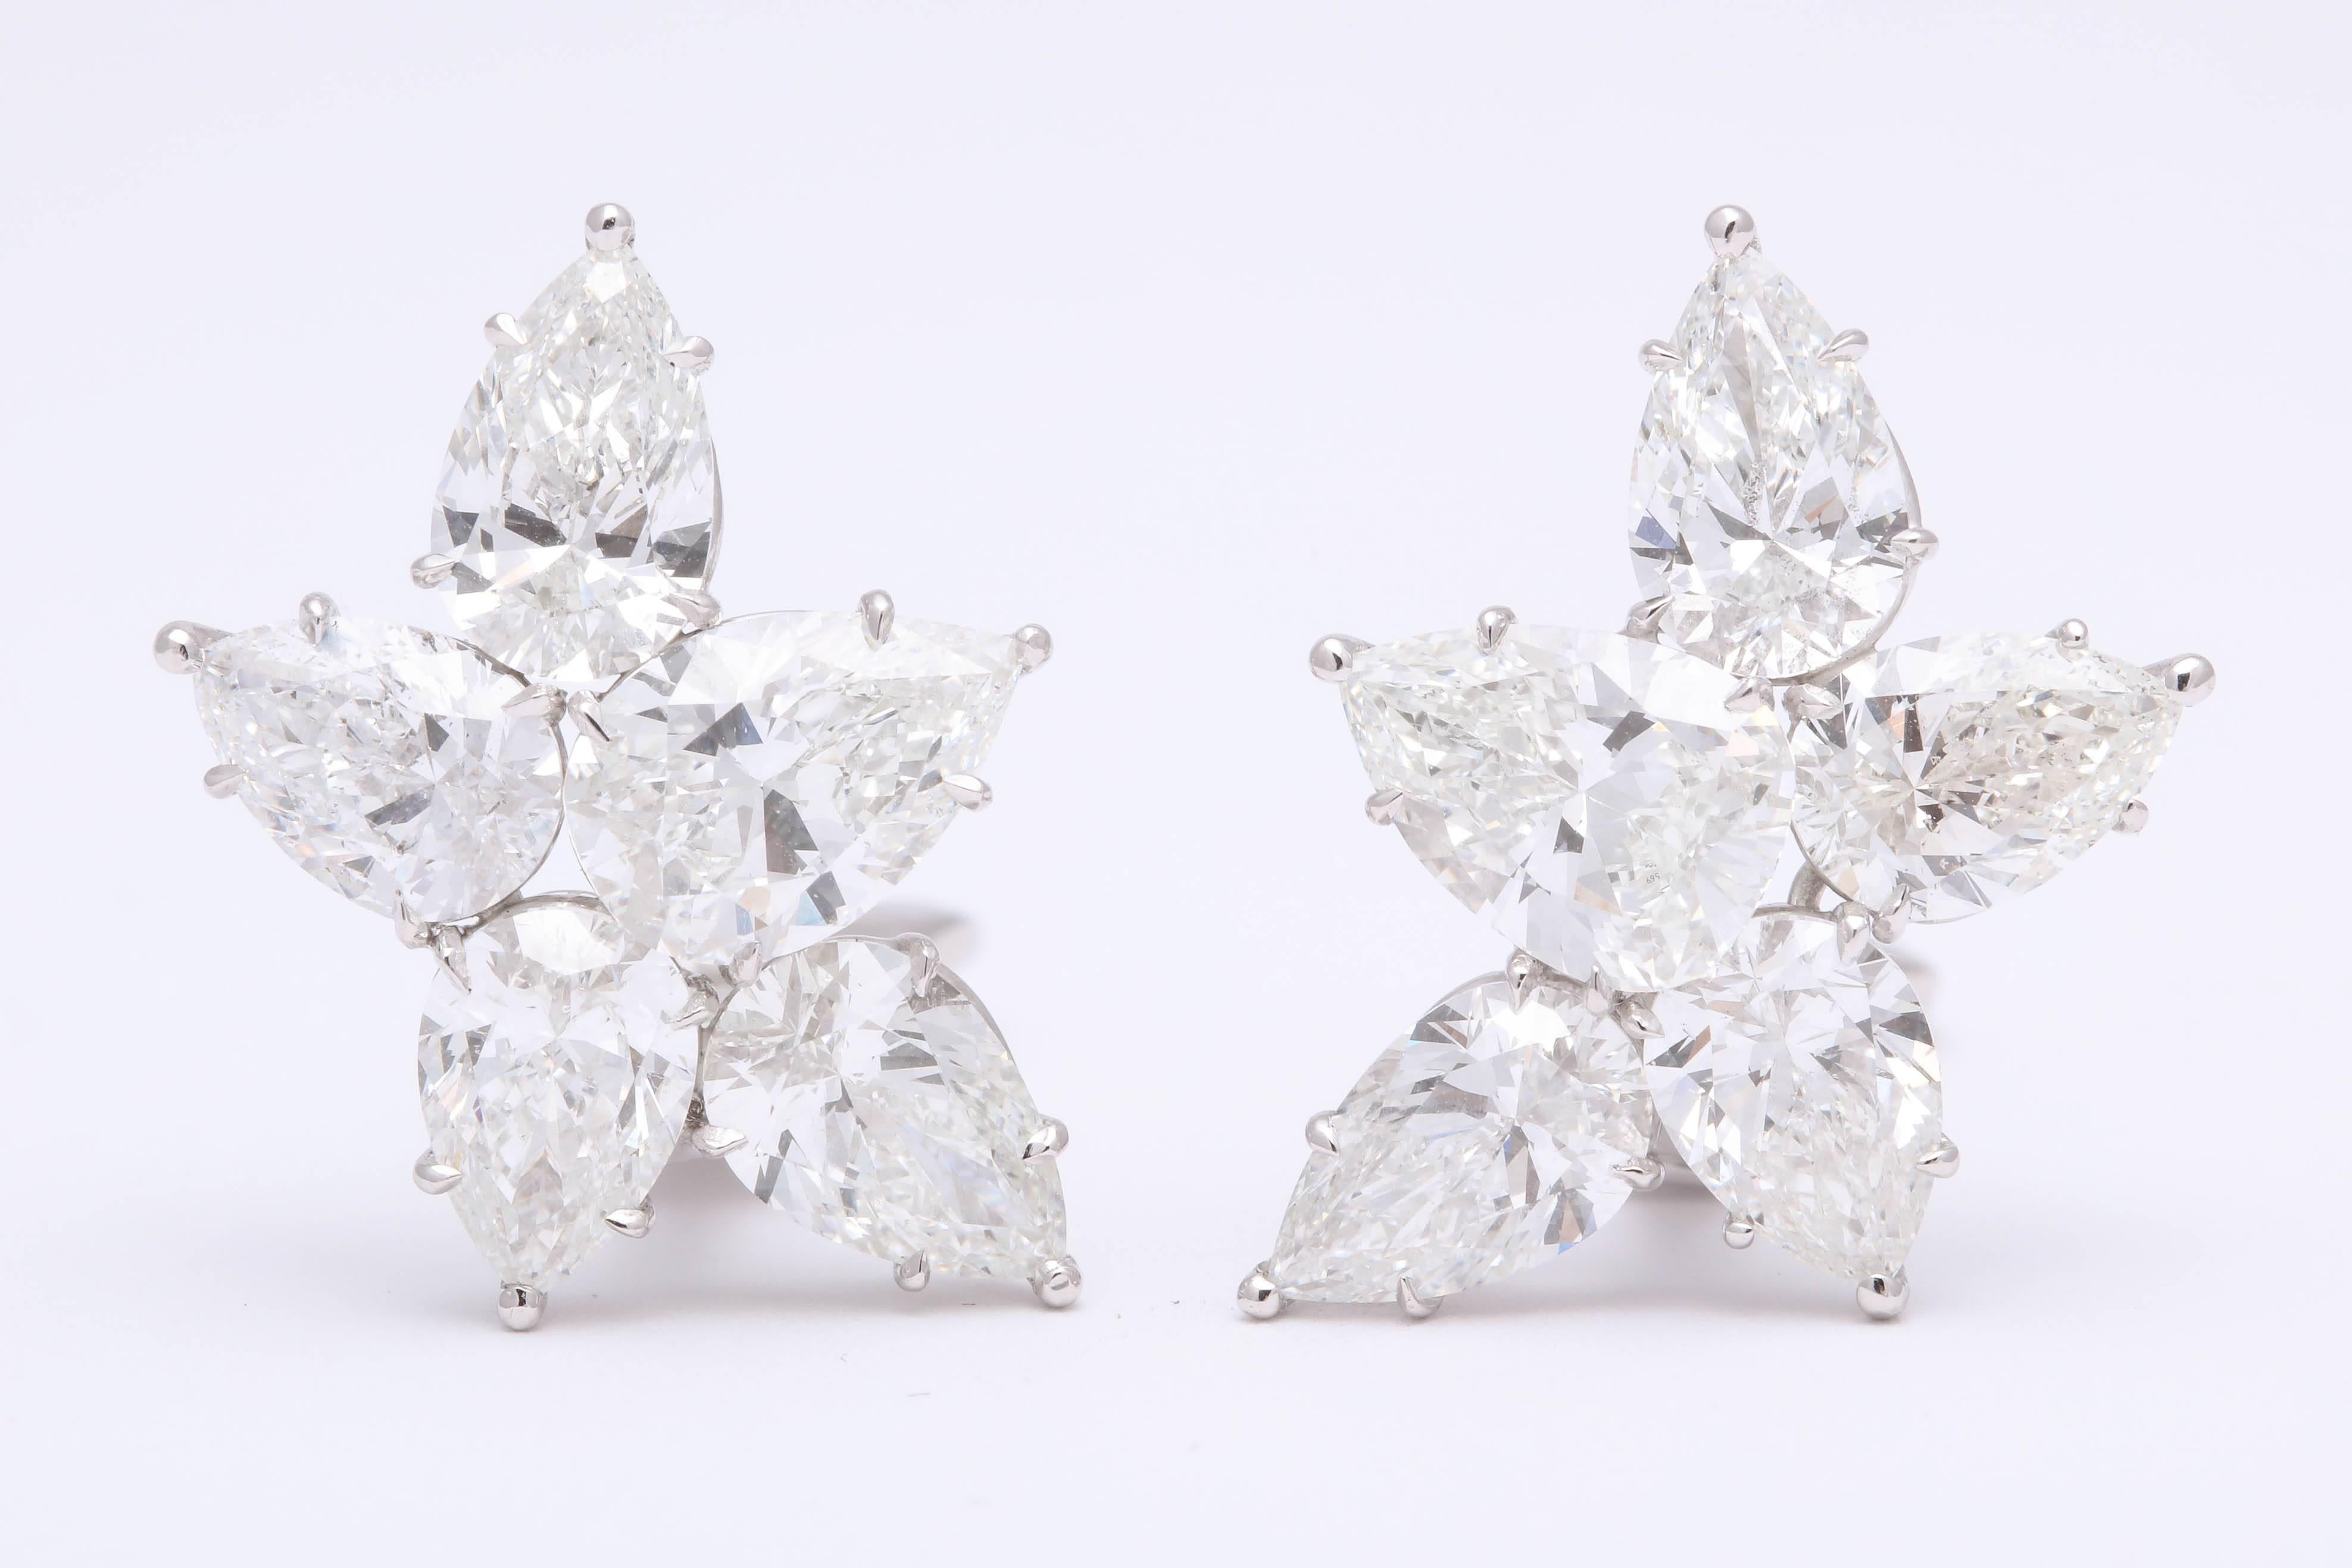 
An incredible pair of diamond cluster earrings.  

8.17 carats of white F/G color VS clarity pear shapes set in a handmade platinum mounting. The two largest diamonds weigh over 1 carat each and are GIA certified. 

An impeccably designed